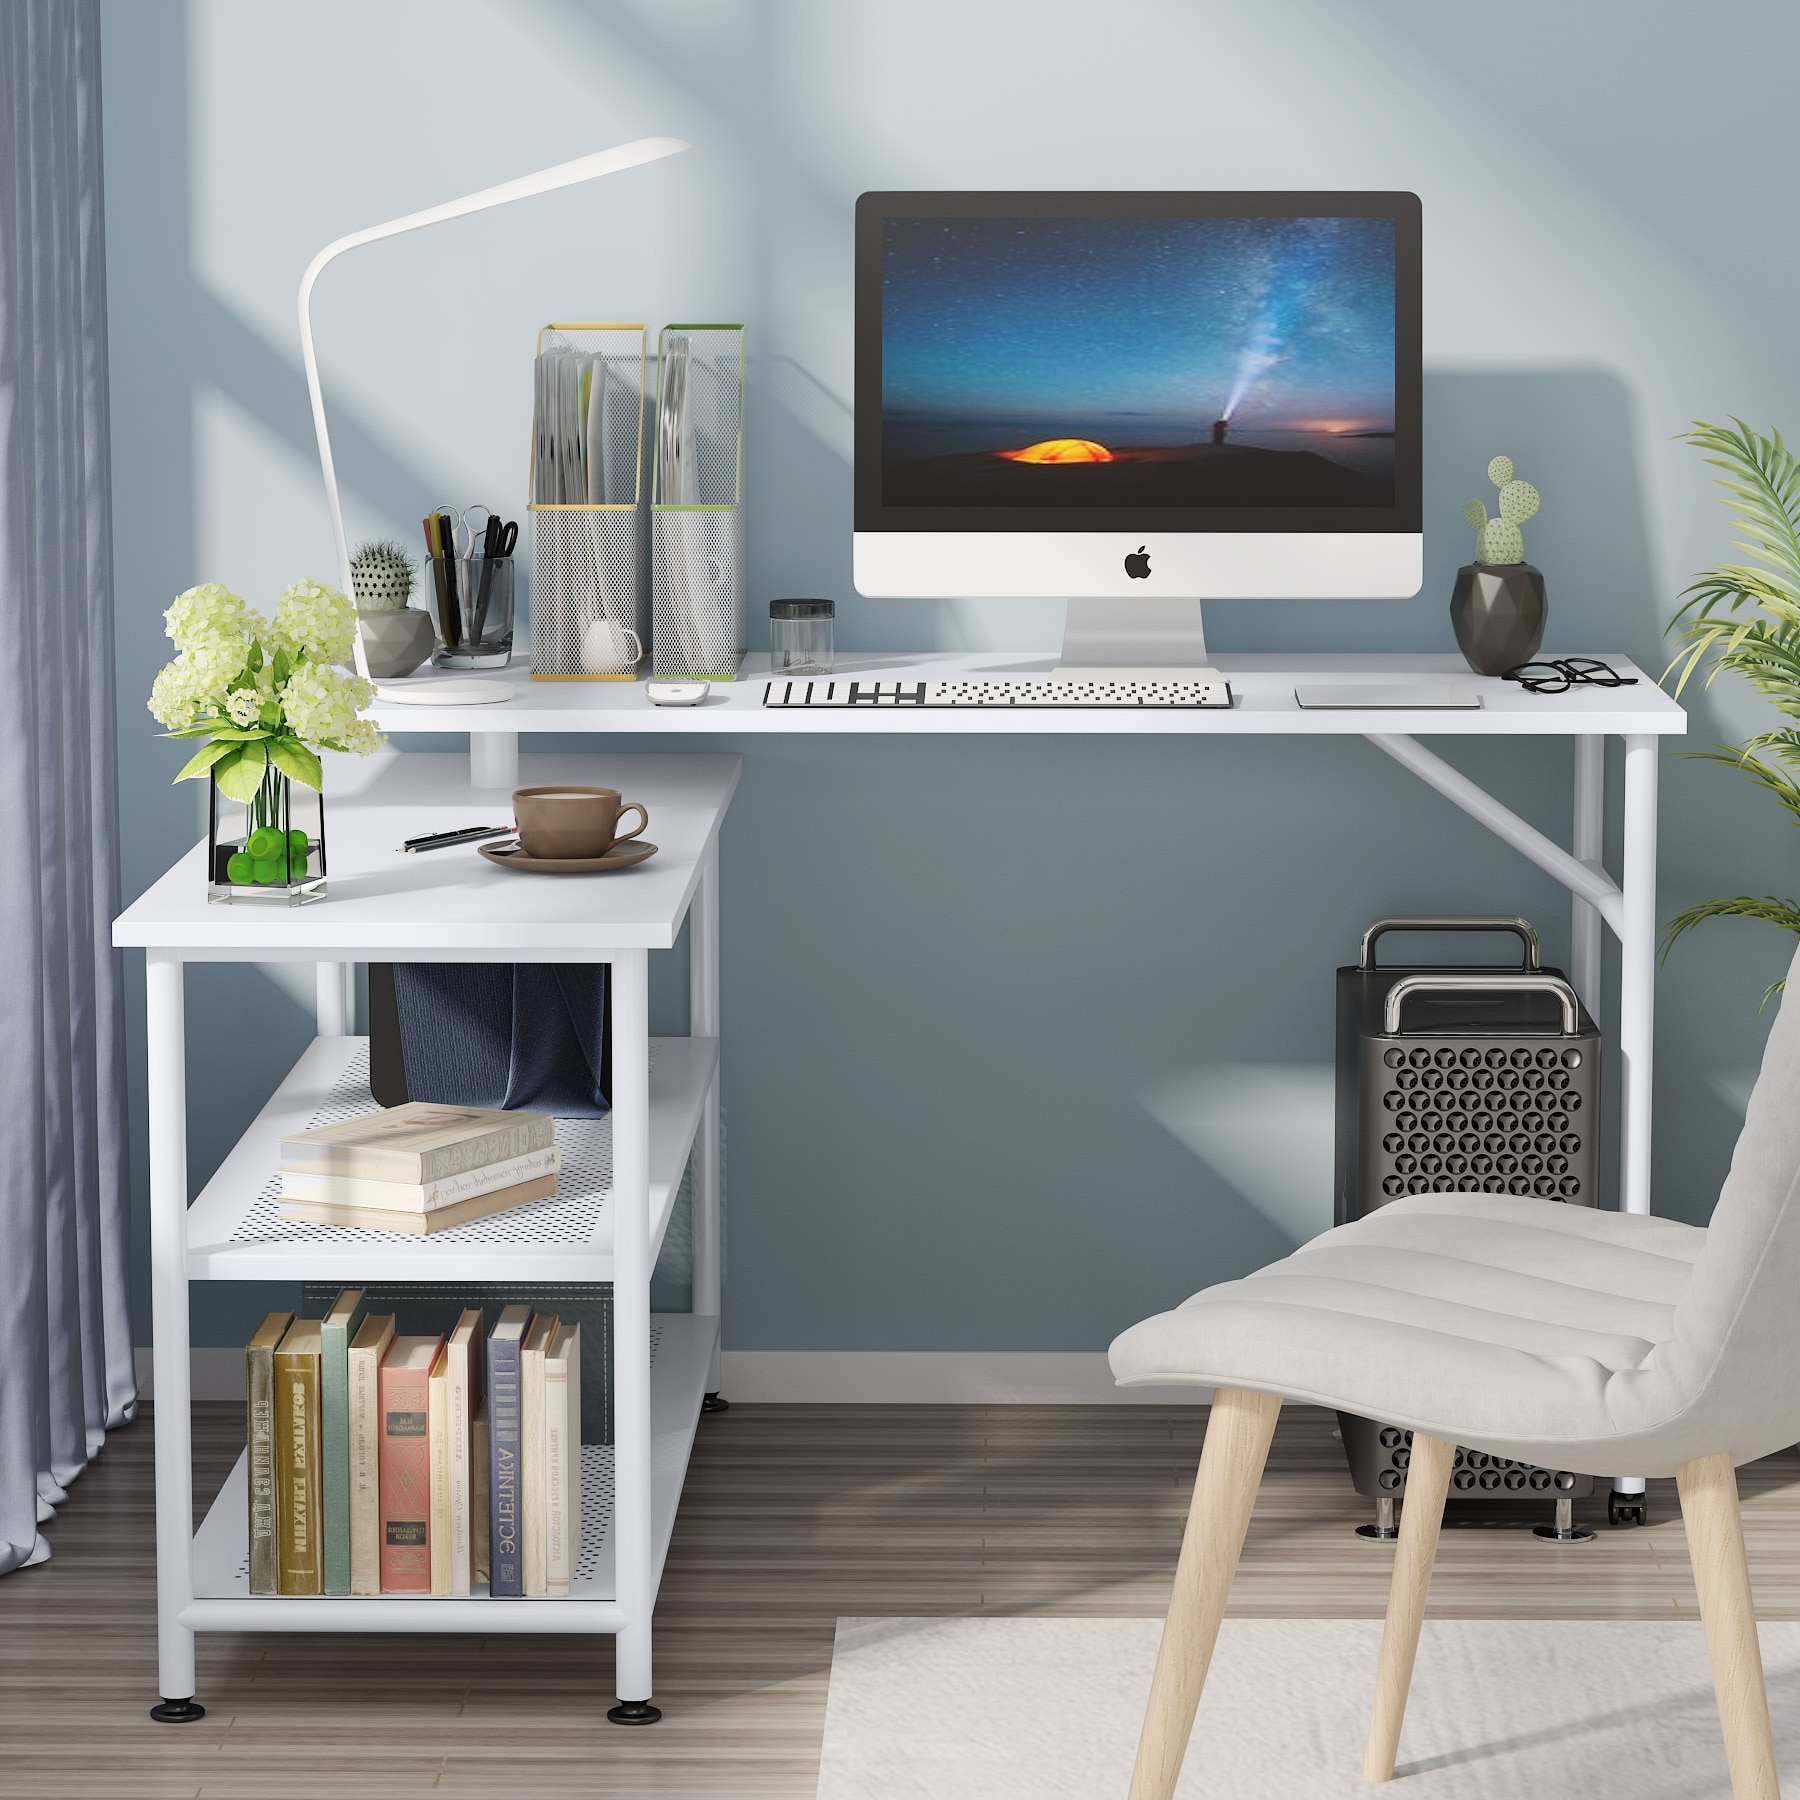 ODK 40 Inch Small Desk with Fabric Drawers- for Bedroom, White Vanity Desk  with Storage, Home Office Computer Desk for Small Spaces, Modern Work